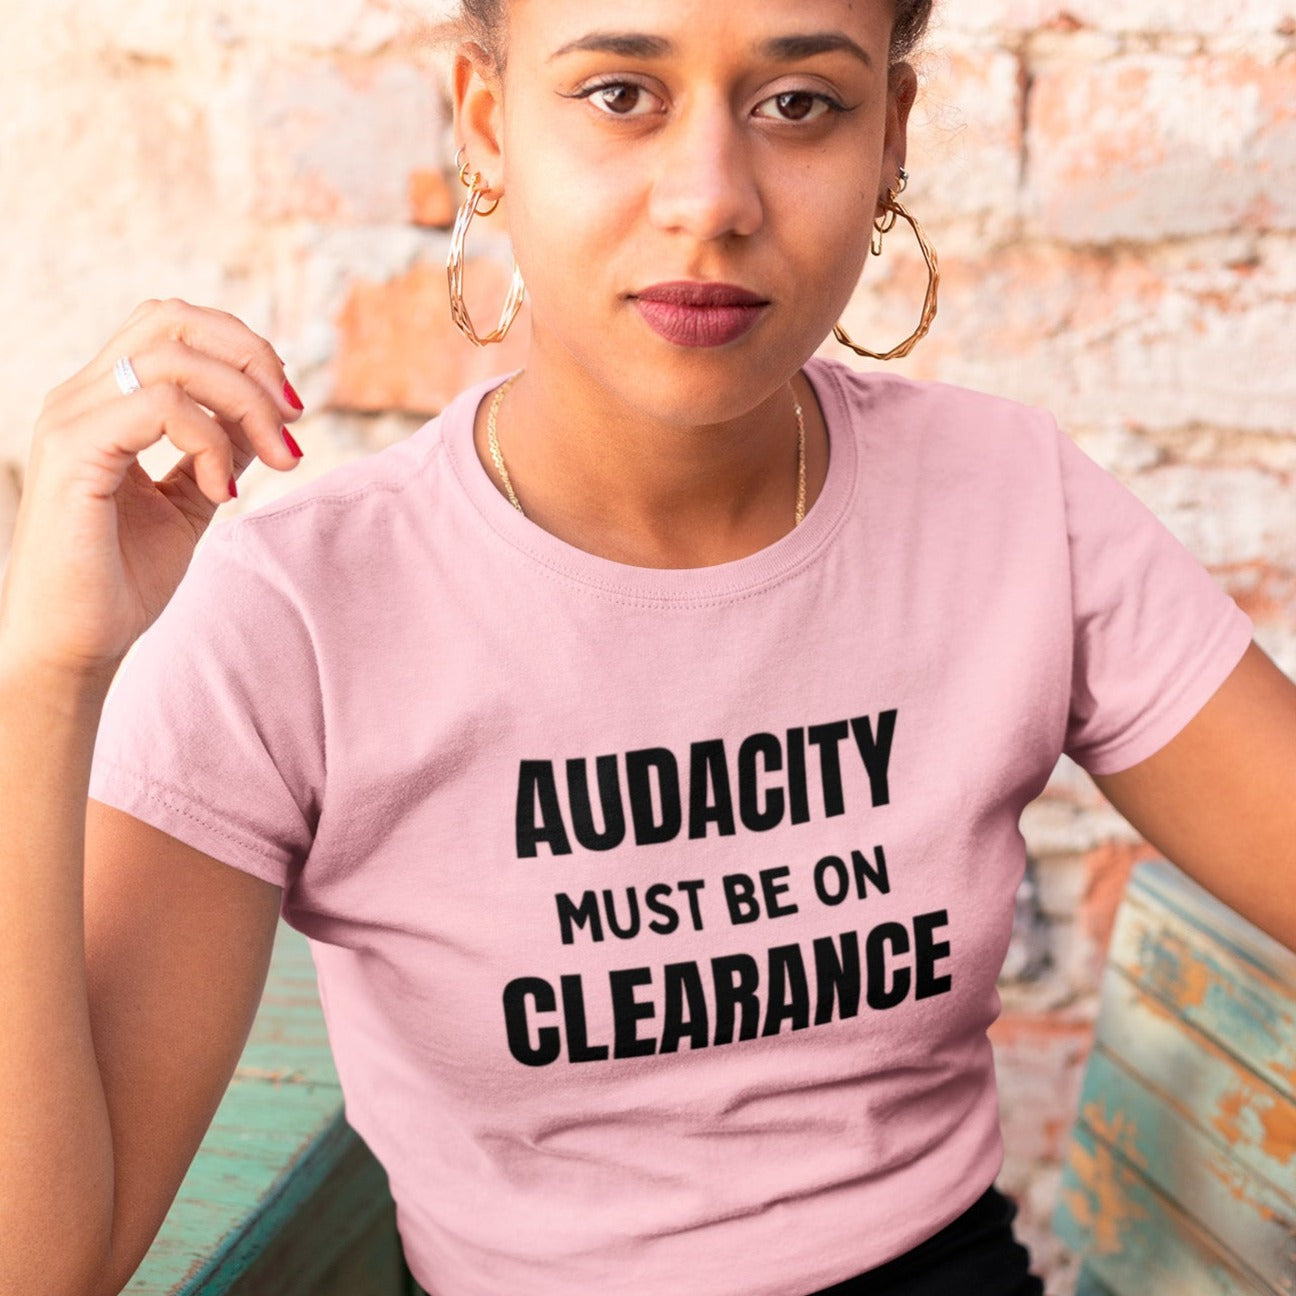 audacity-must-be-on-clearance-pink-t-shirt-unisex-funny-mockup-of-a-beautiful-girl-sitting-on-a-rustic-wooden-chair